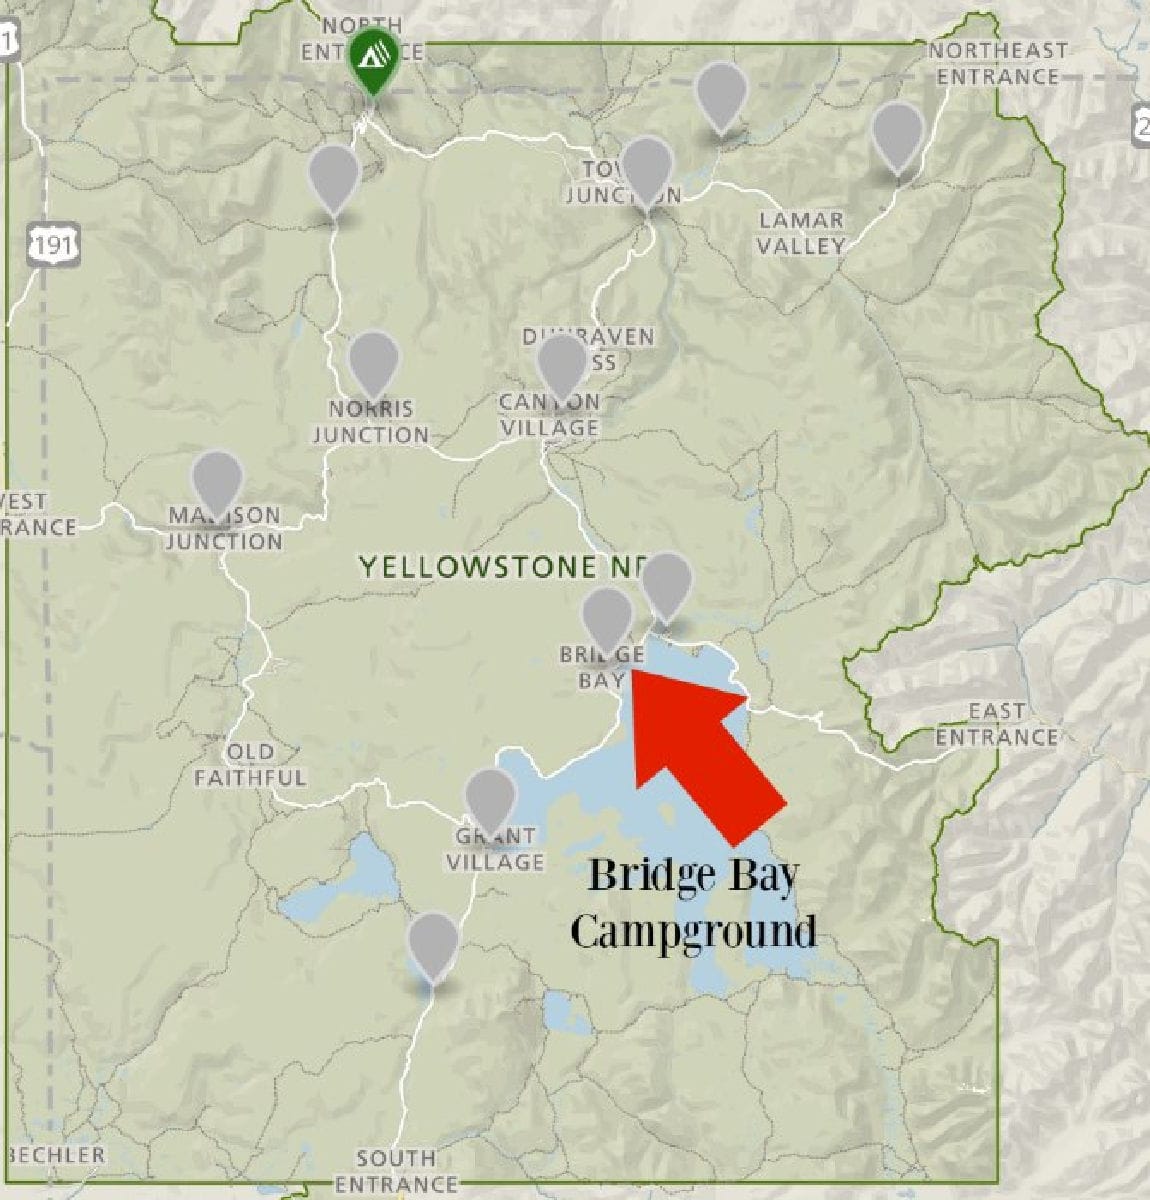 Map of Yellowstone National Park showing location of Bridge Bay Campground